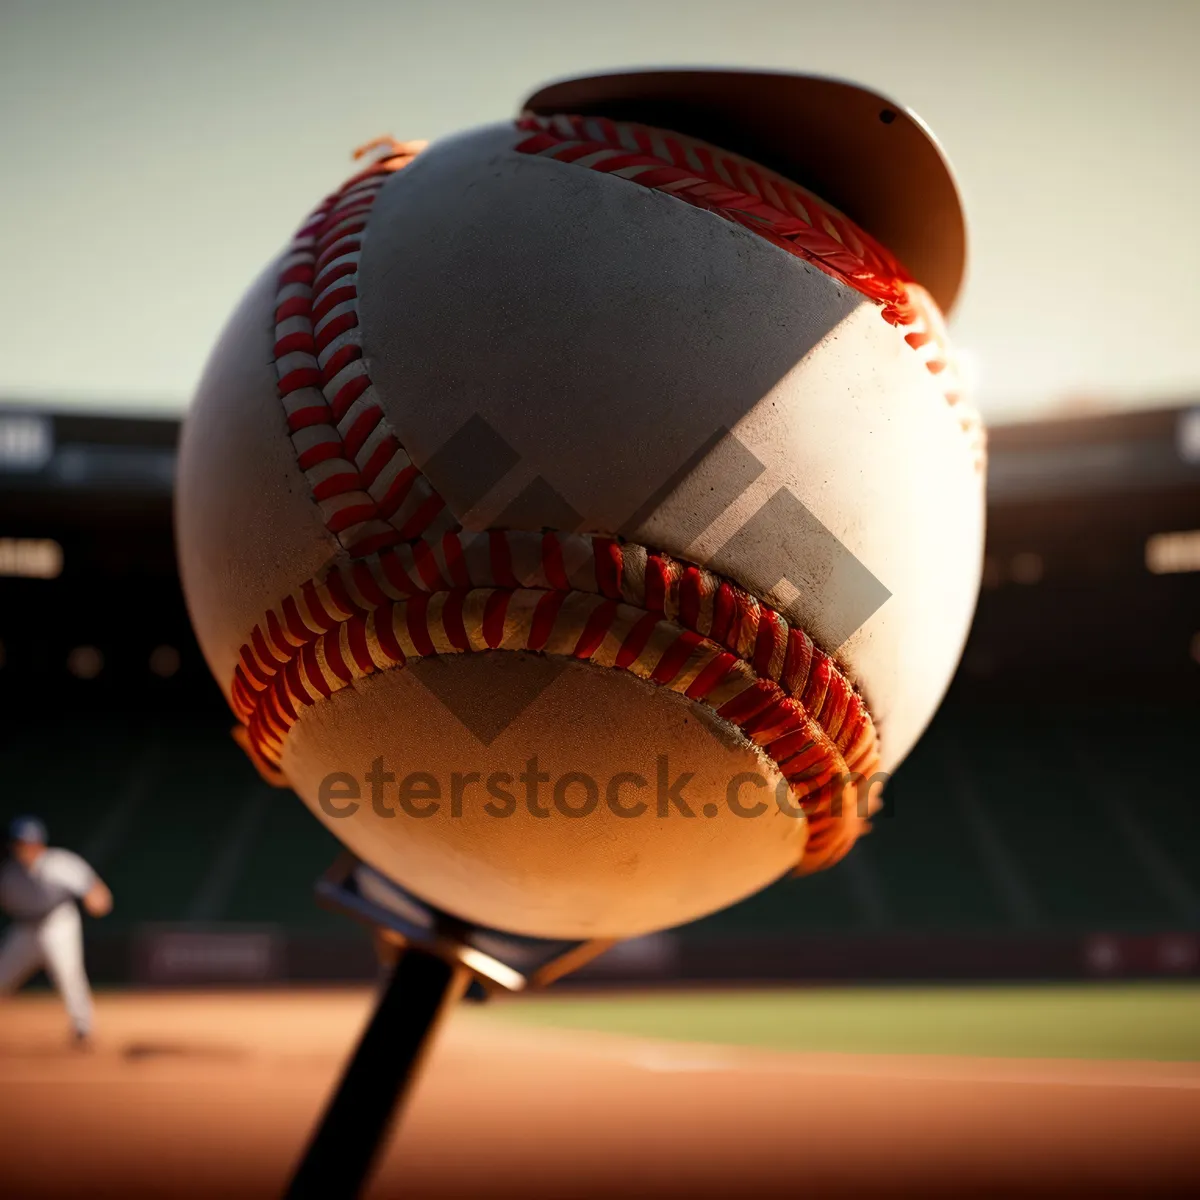 Picture of Baseball Glove on Grass - Game Time Gear